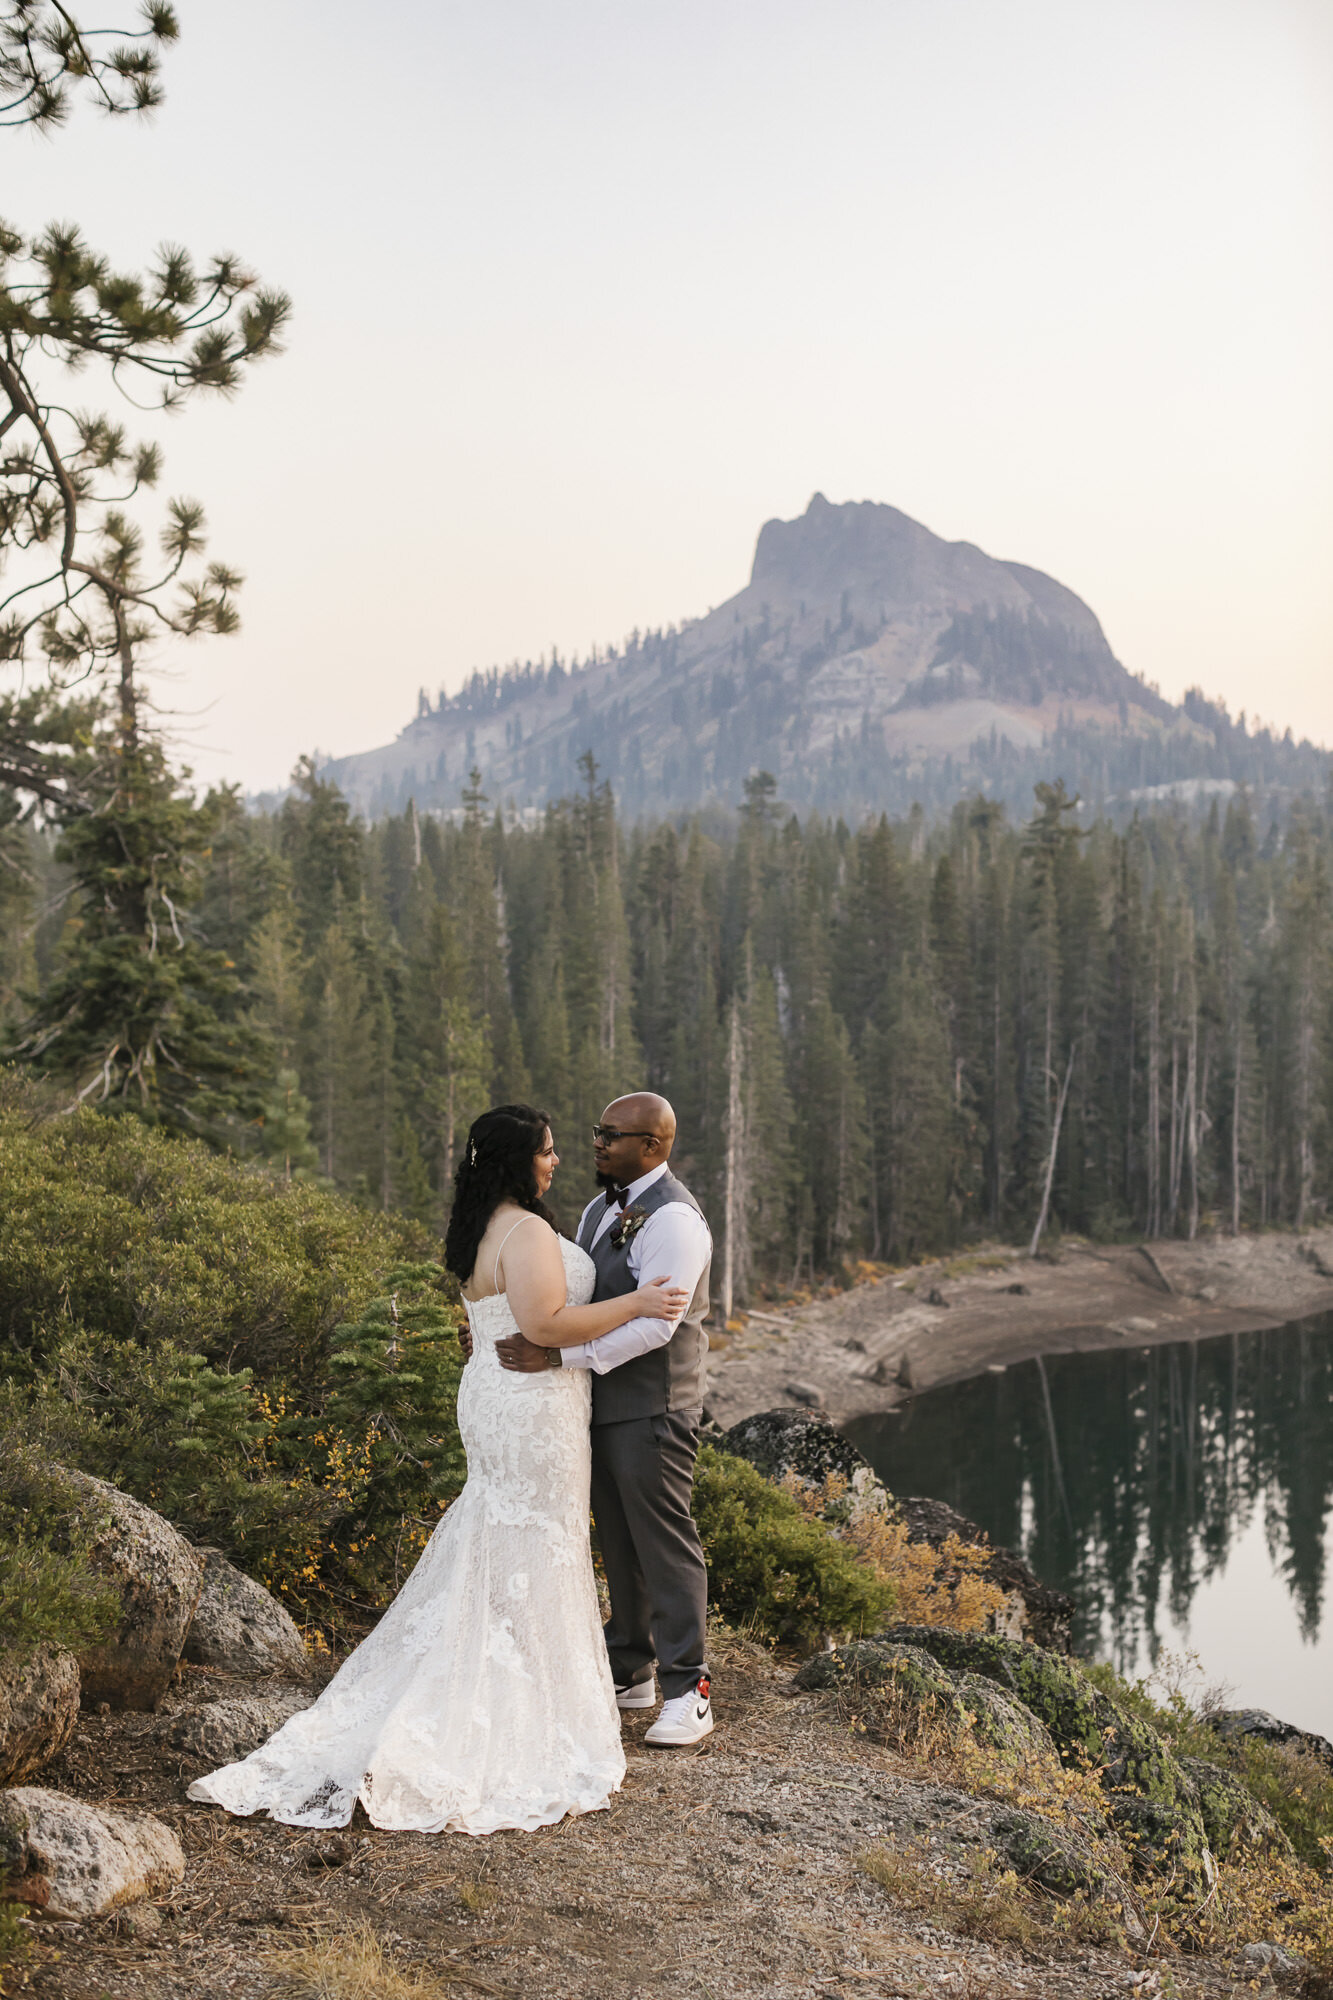 Wedding couple hold each other overlooking lake and mountain peak in Tahoe forest during their adventurous elopement